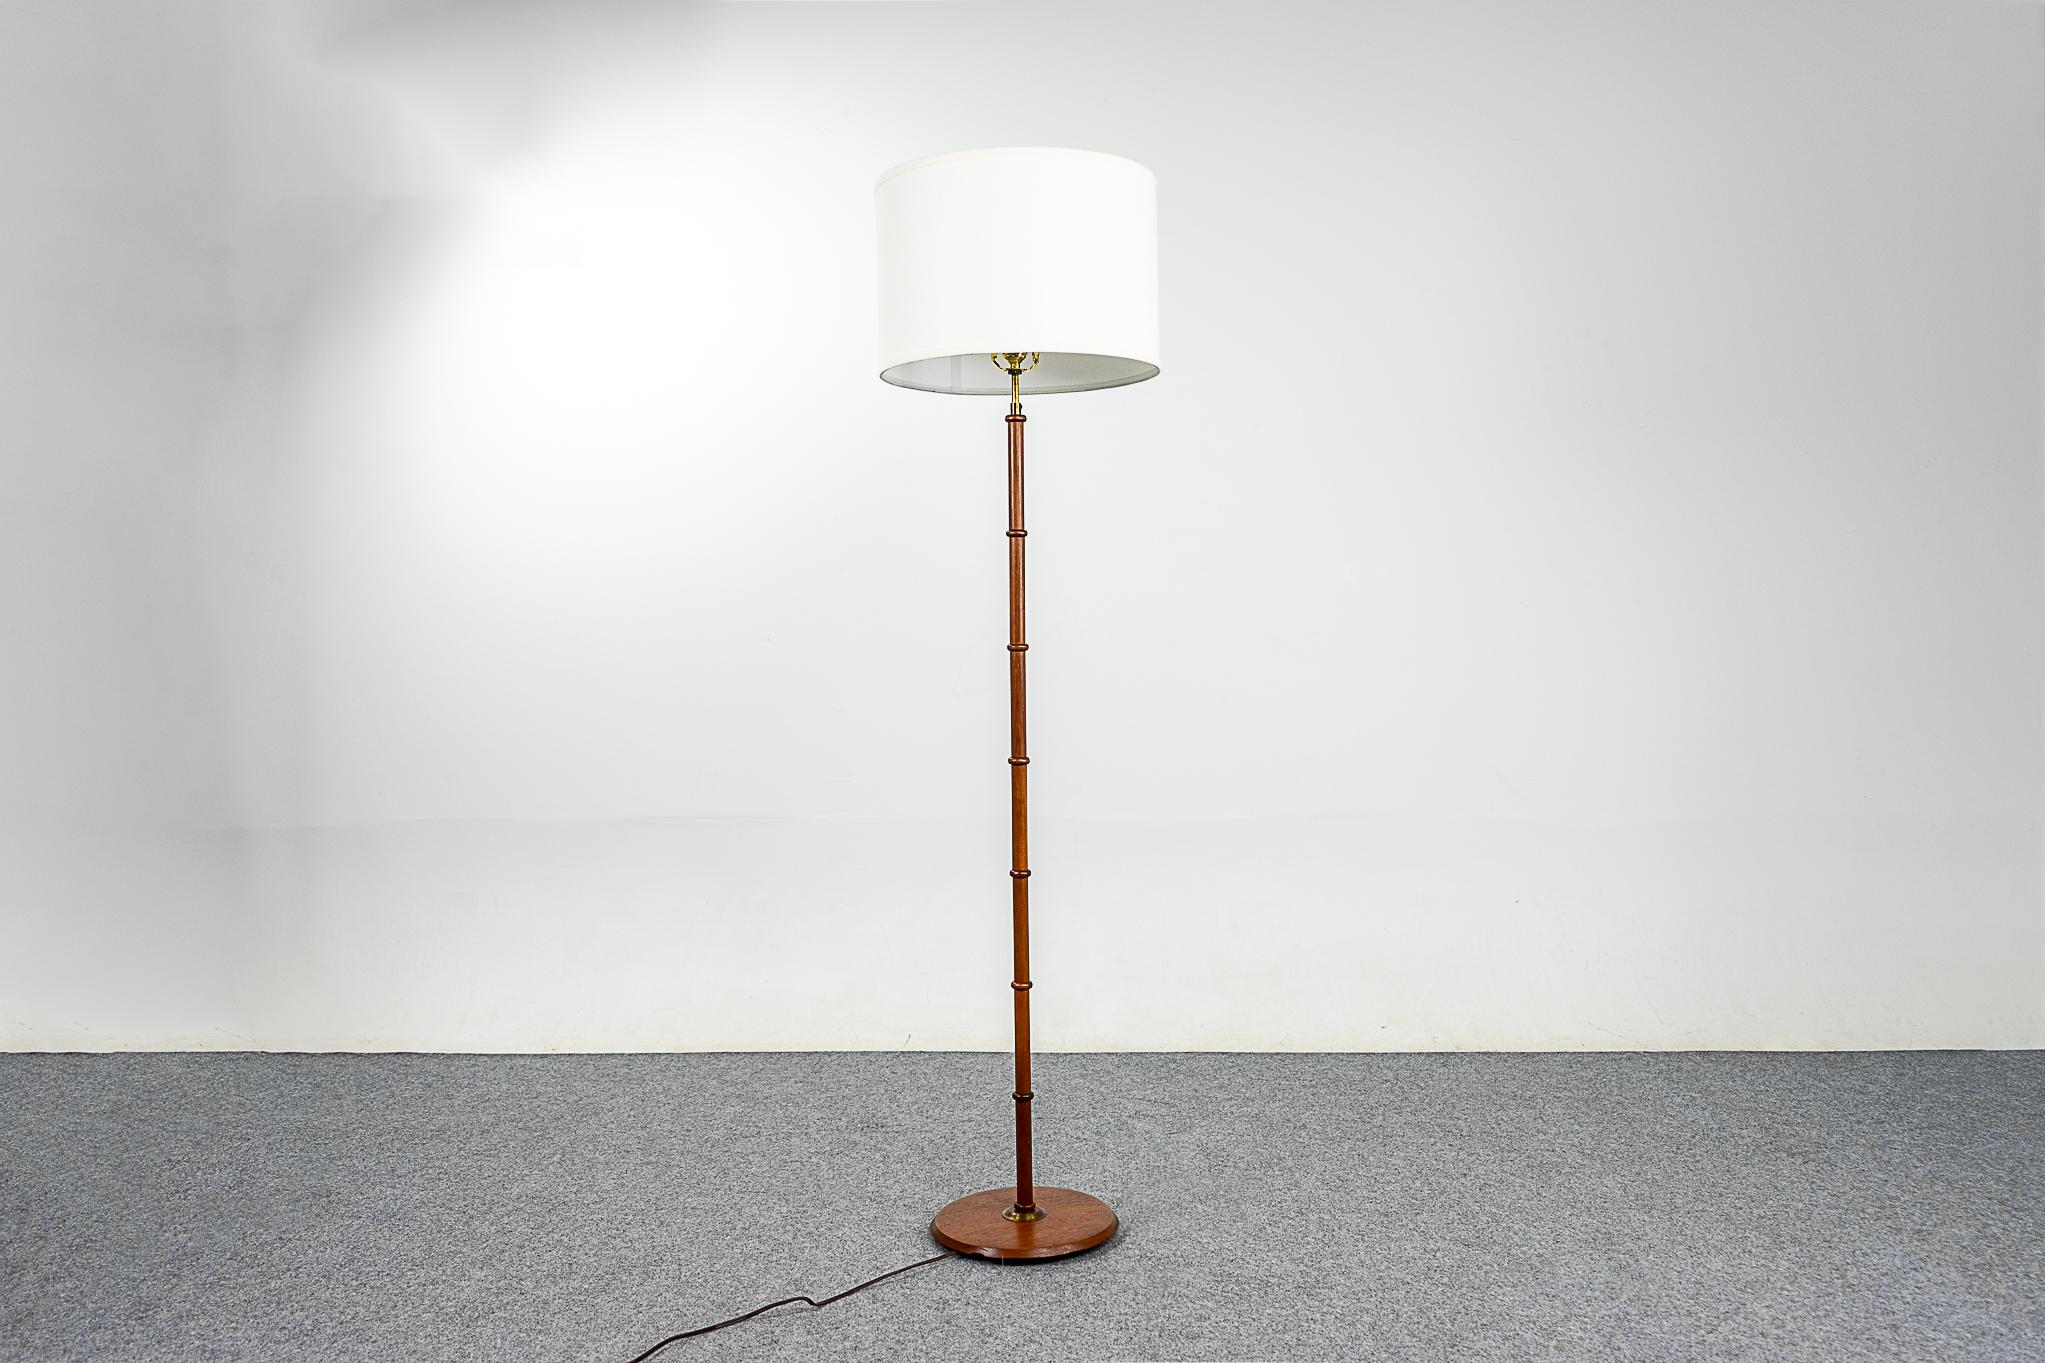 Teak Danish floor lamp, circa 1960's. Beautiful solid teak veneer construction with metal accents. Pristine custom fabric shade. New tri-light socket allows for 3 brightness levels, rewired for 110V.

Please inquire for international and remote